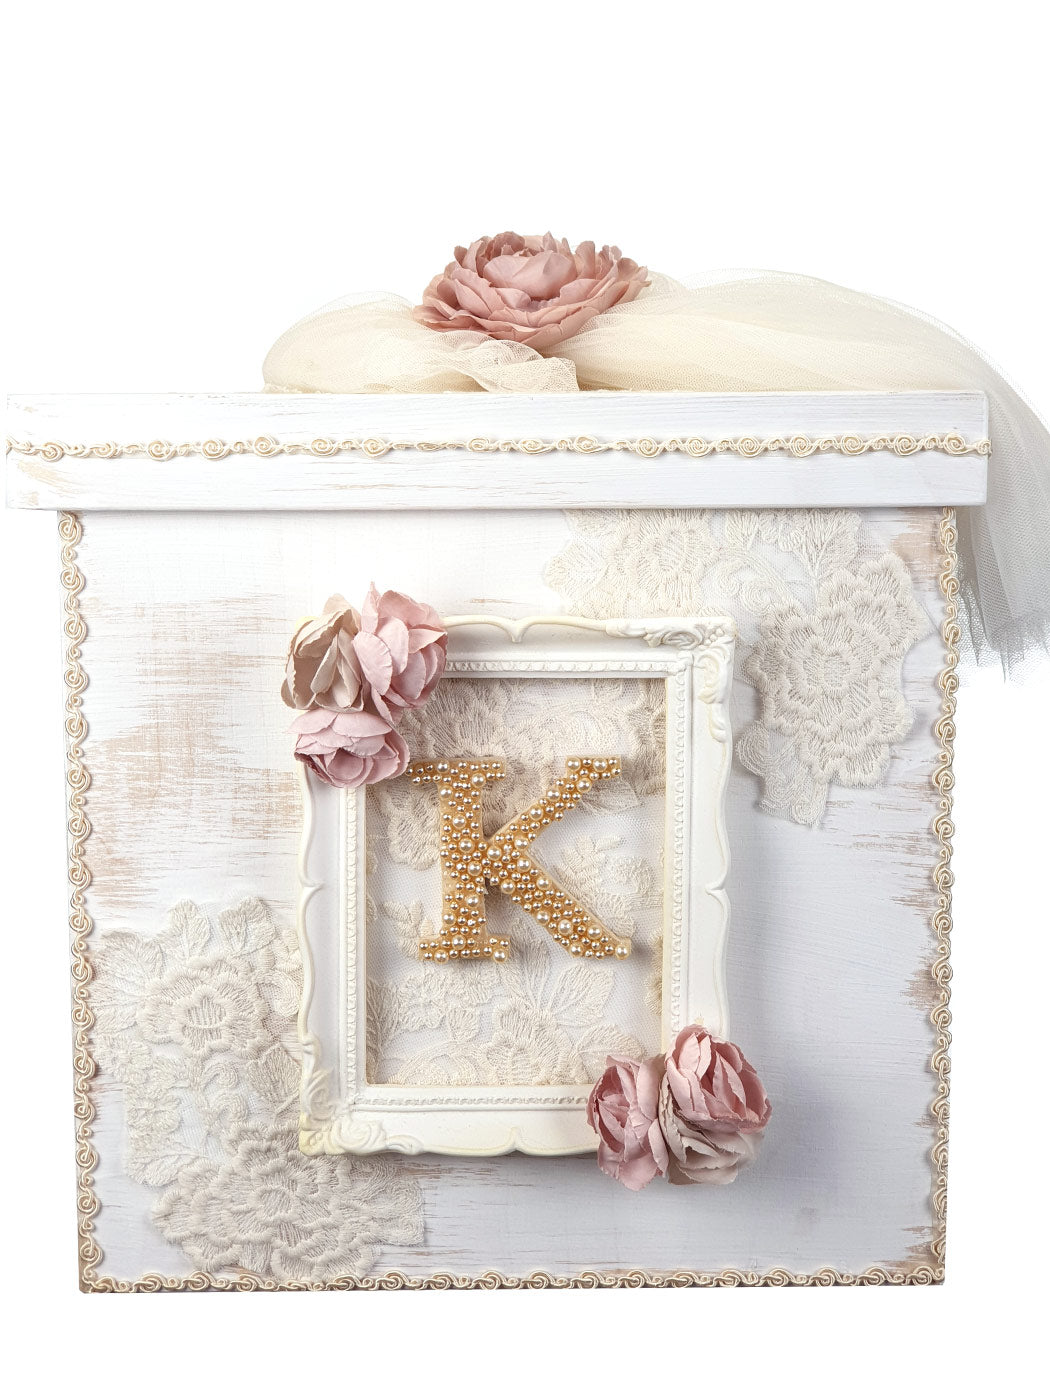 Baptism box with lace and monogram - MAIRA SUMMER